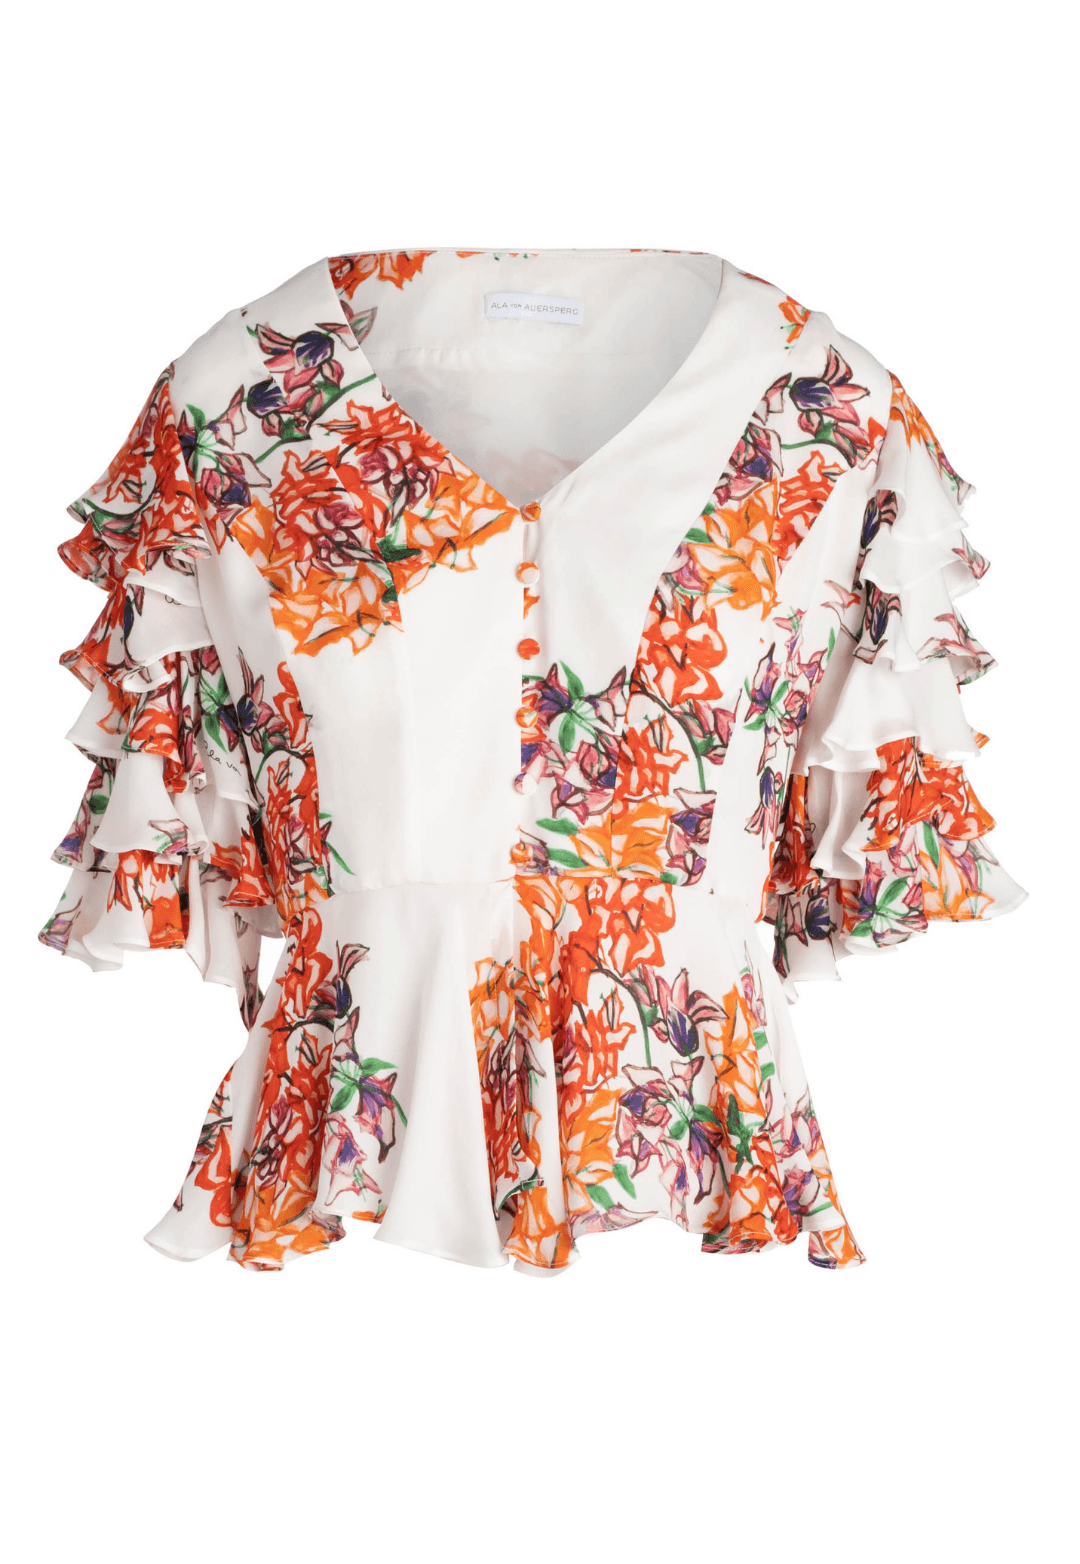 silk orange and white flower printed peplum top with buttons and ruffled sleeves